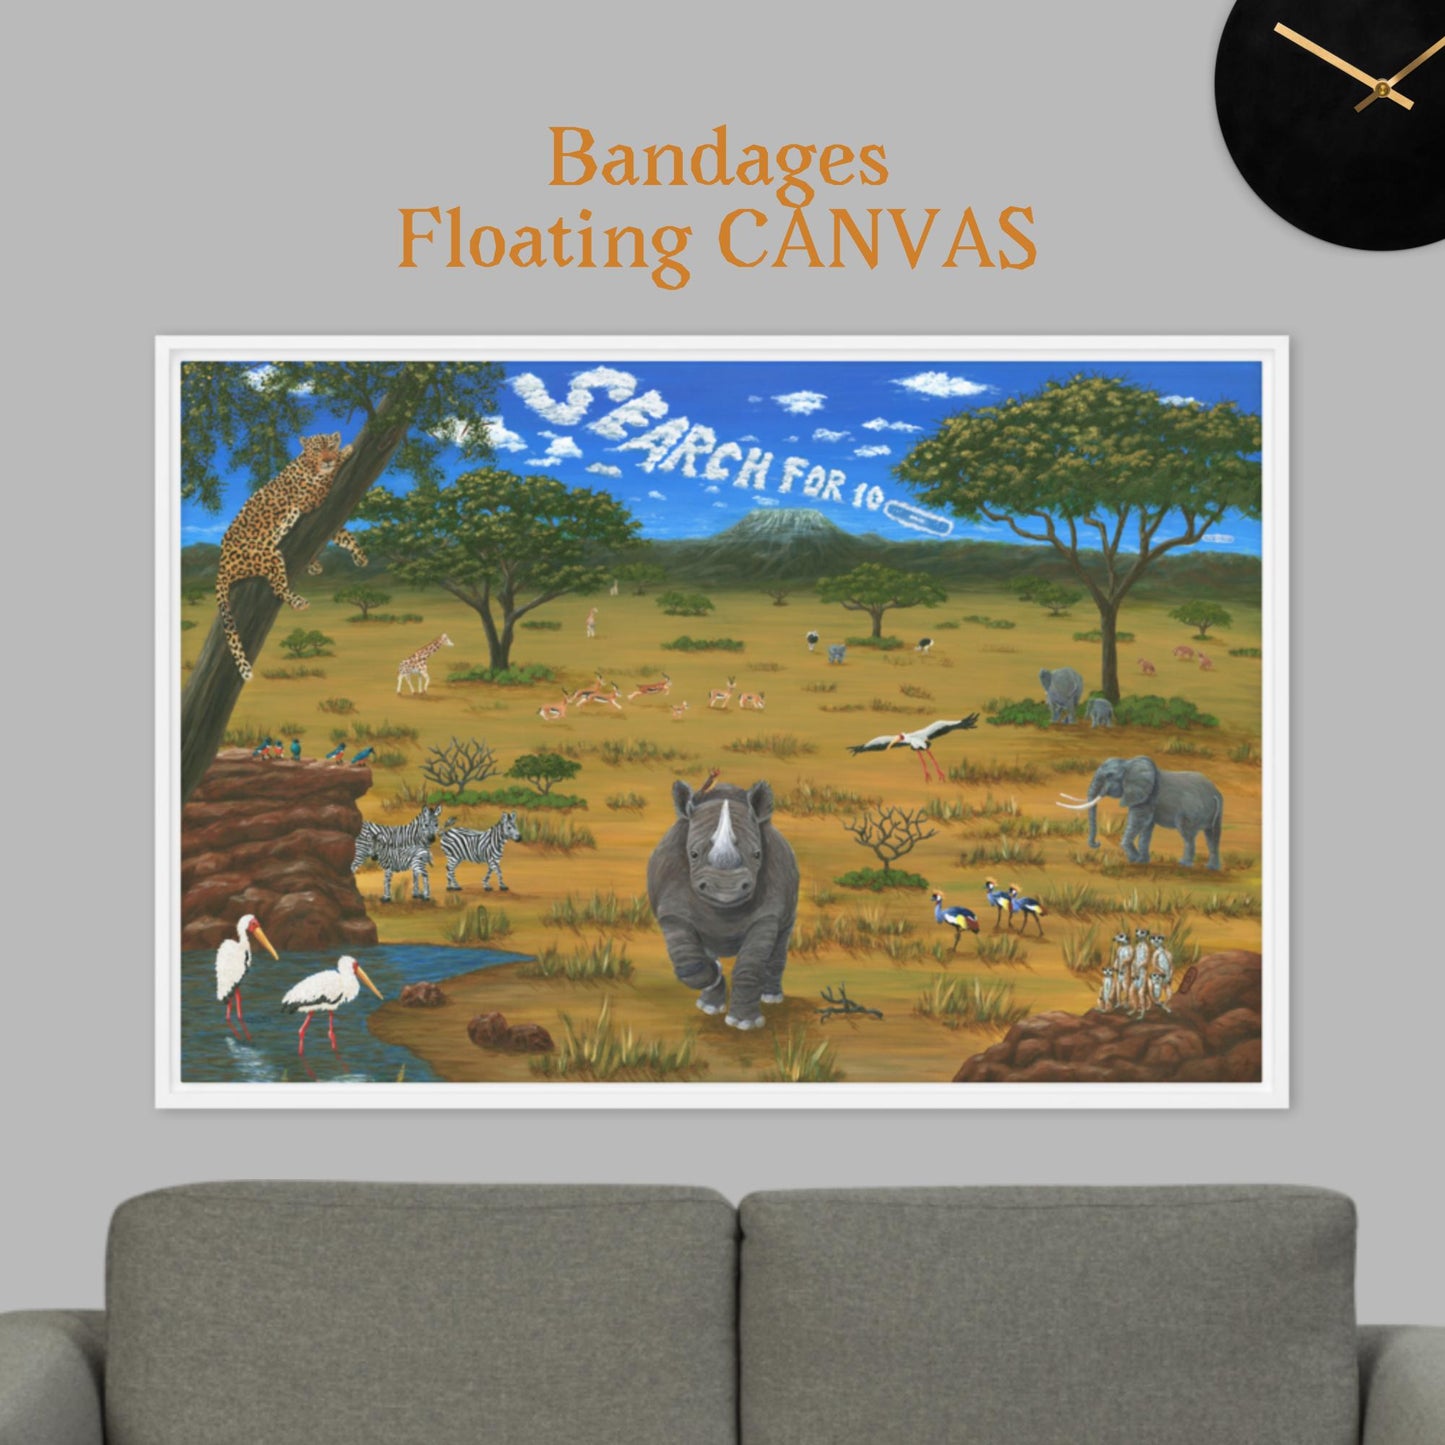 African Animal Sights BANDAGES 24"x36" Floating CANVAS Artwork